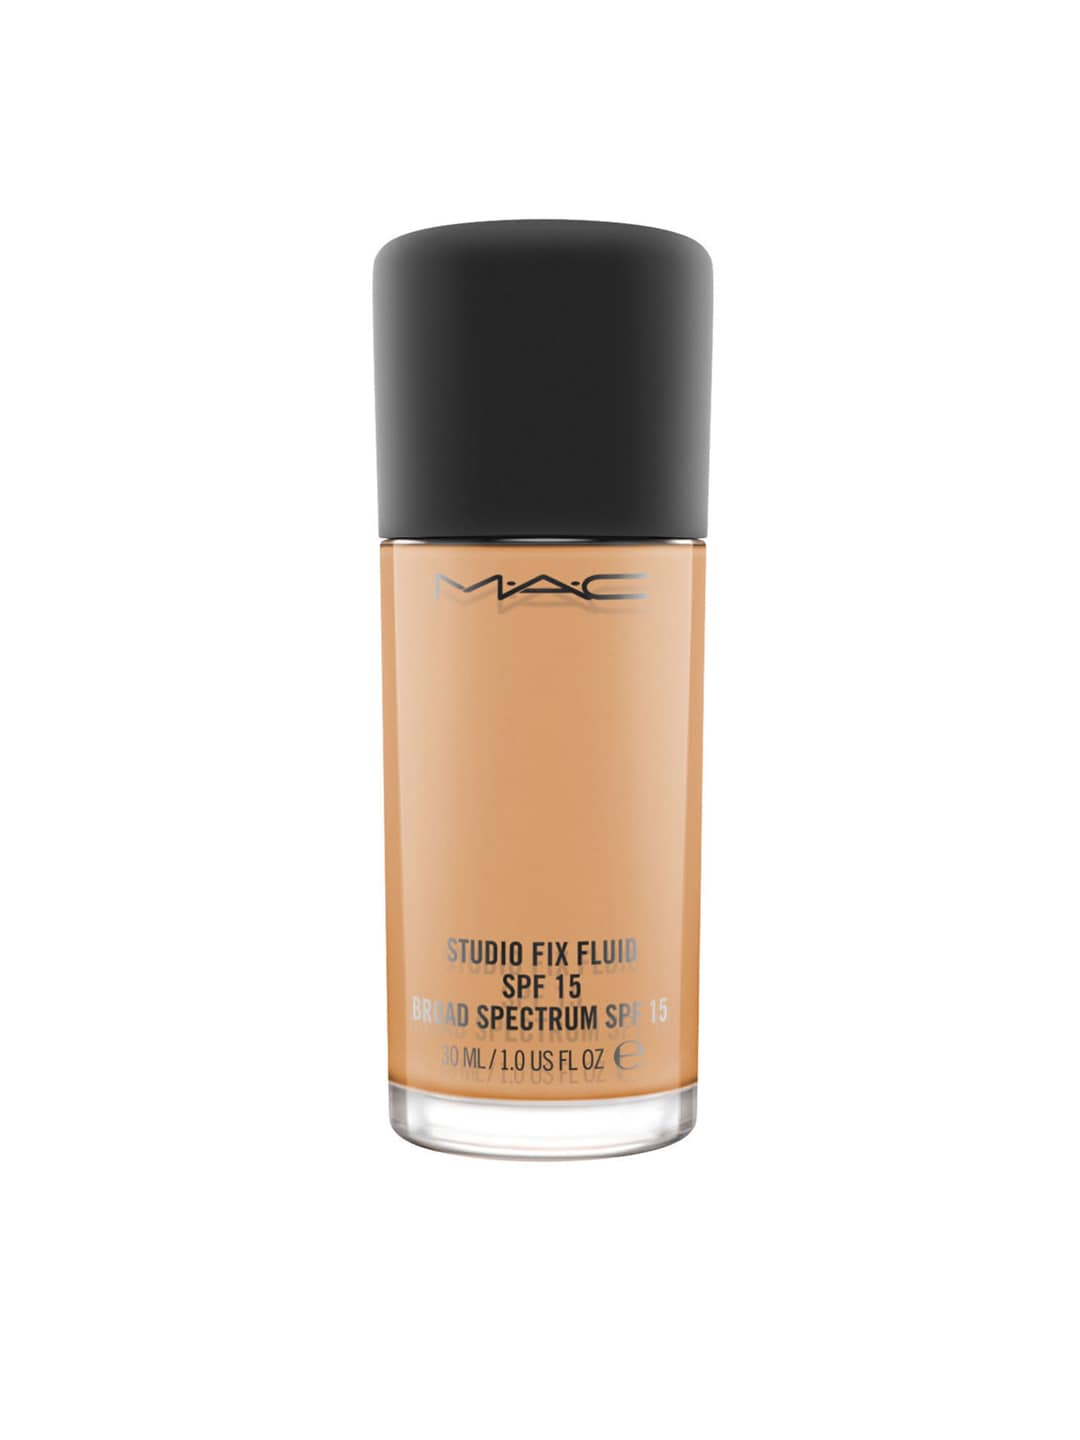 M.A.C Studio Fix Fluid Foundation with SPF 15 - NC40 30ml Price in India